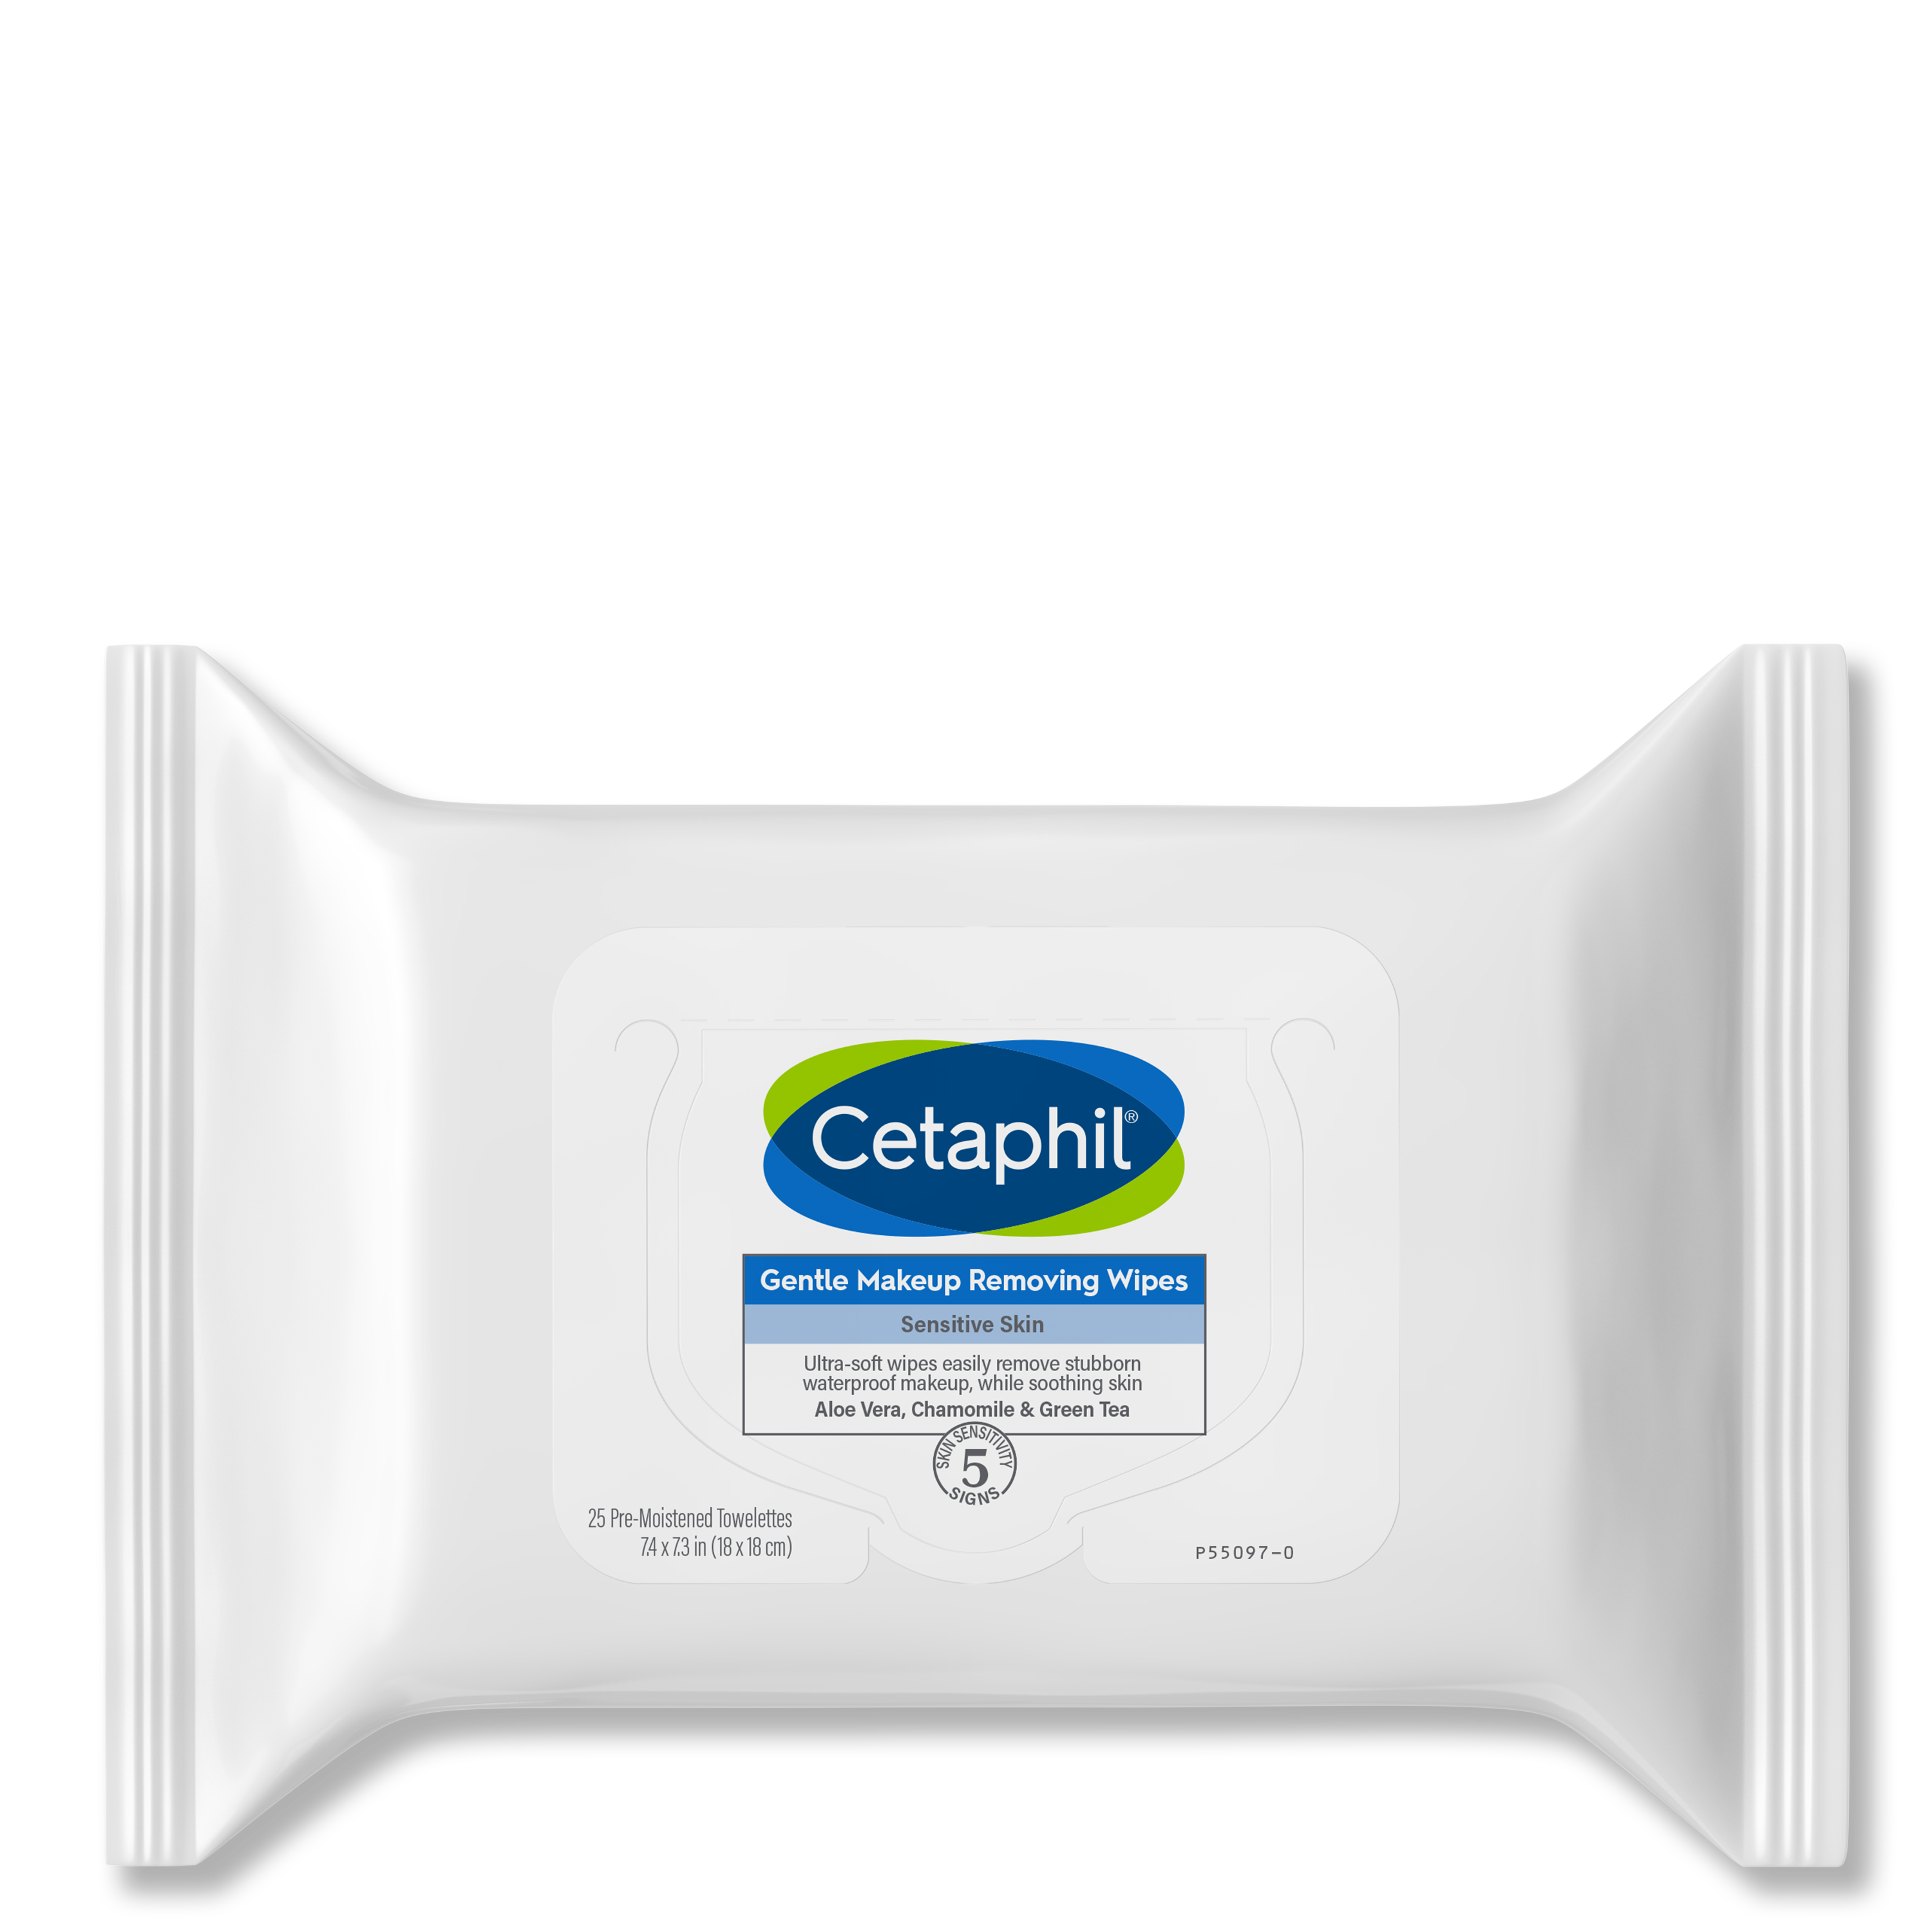 Cetaphil Gentle Makeup Removing Face Wipes, Daily Cleansing Facial Towelettes Gently Remove Makeup, Fragrance and Alcohol Free, 25 Count Makeup Remover Wipes